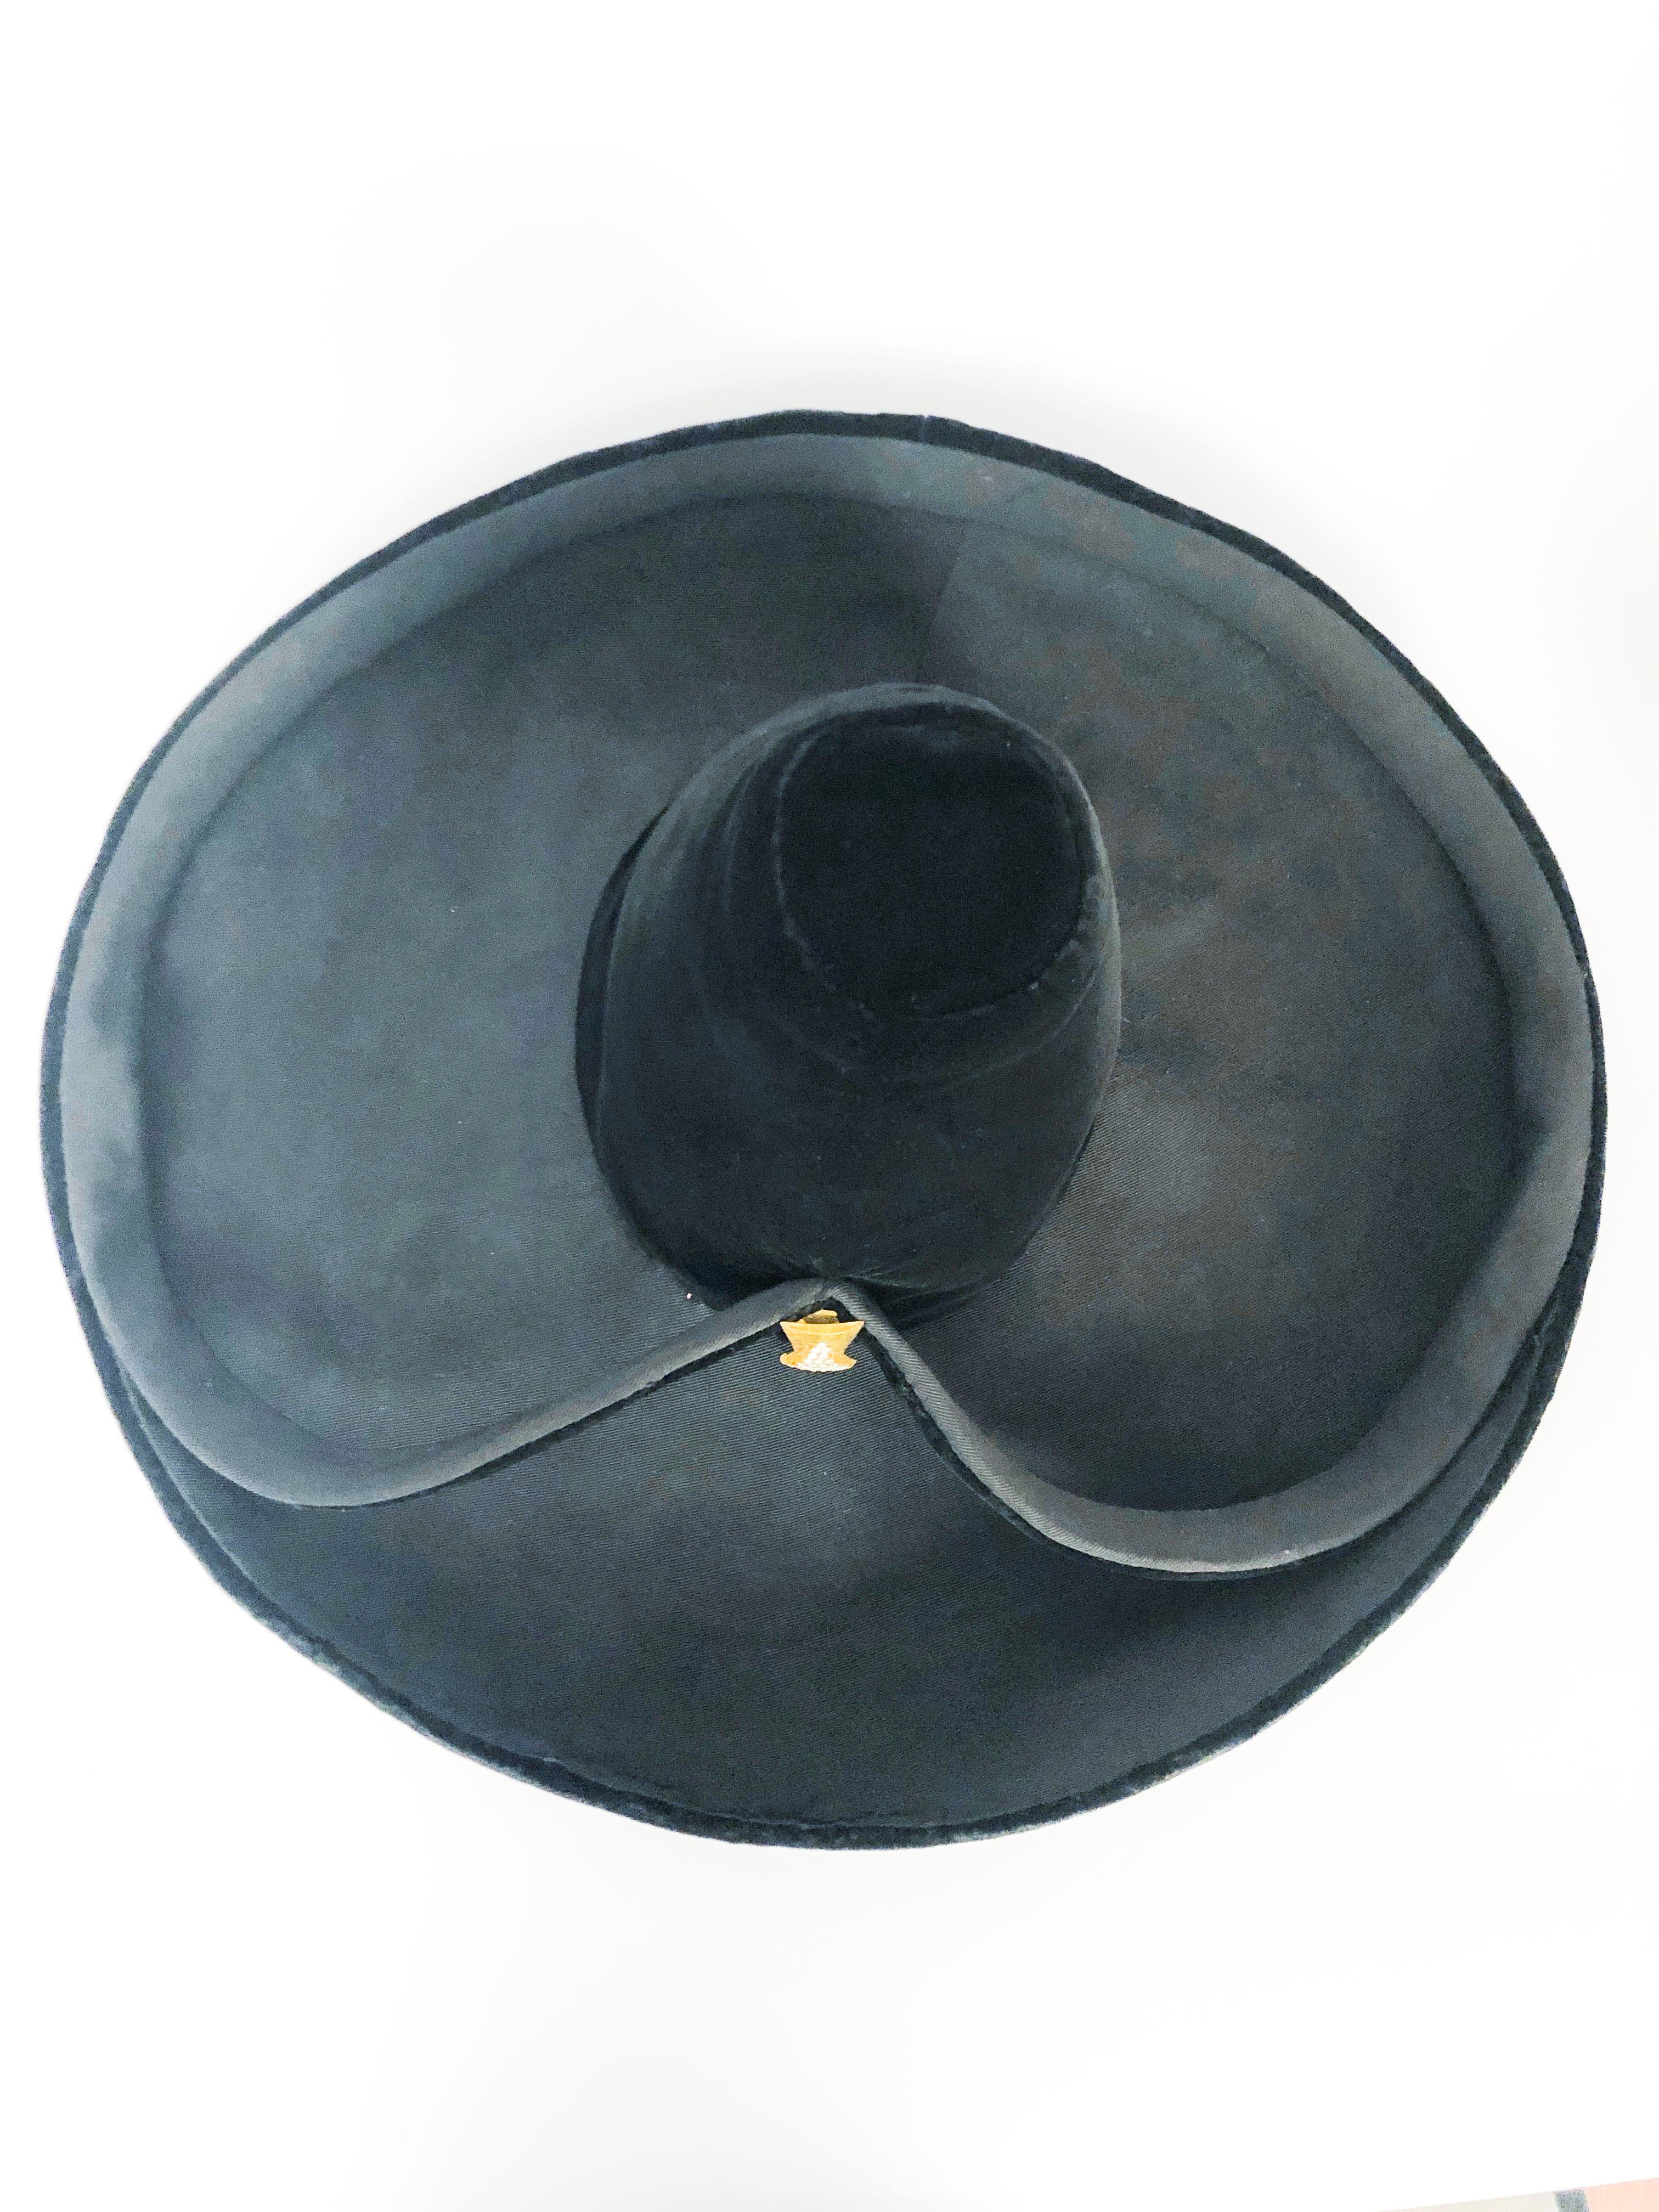 1930s Black High Design Picture Hat In Good Condition For Sale In San Francisco, CA